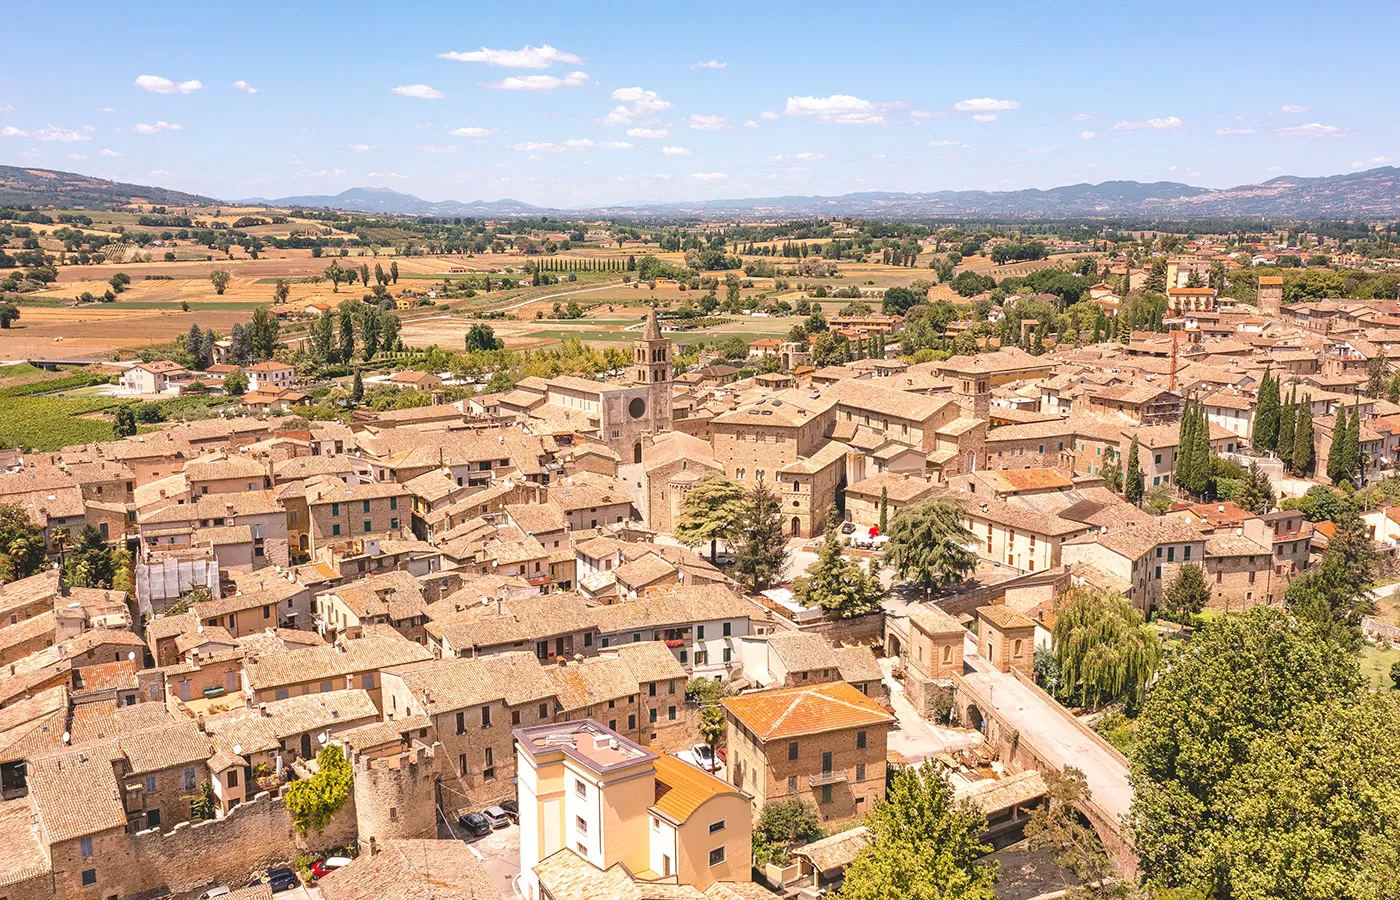 Things to do in Umbria Italy - Visit Bevagna